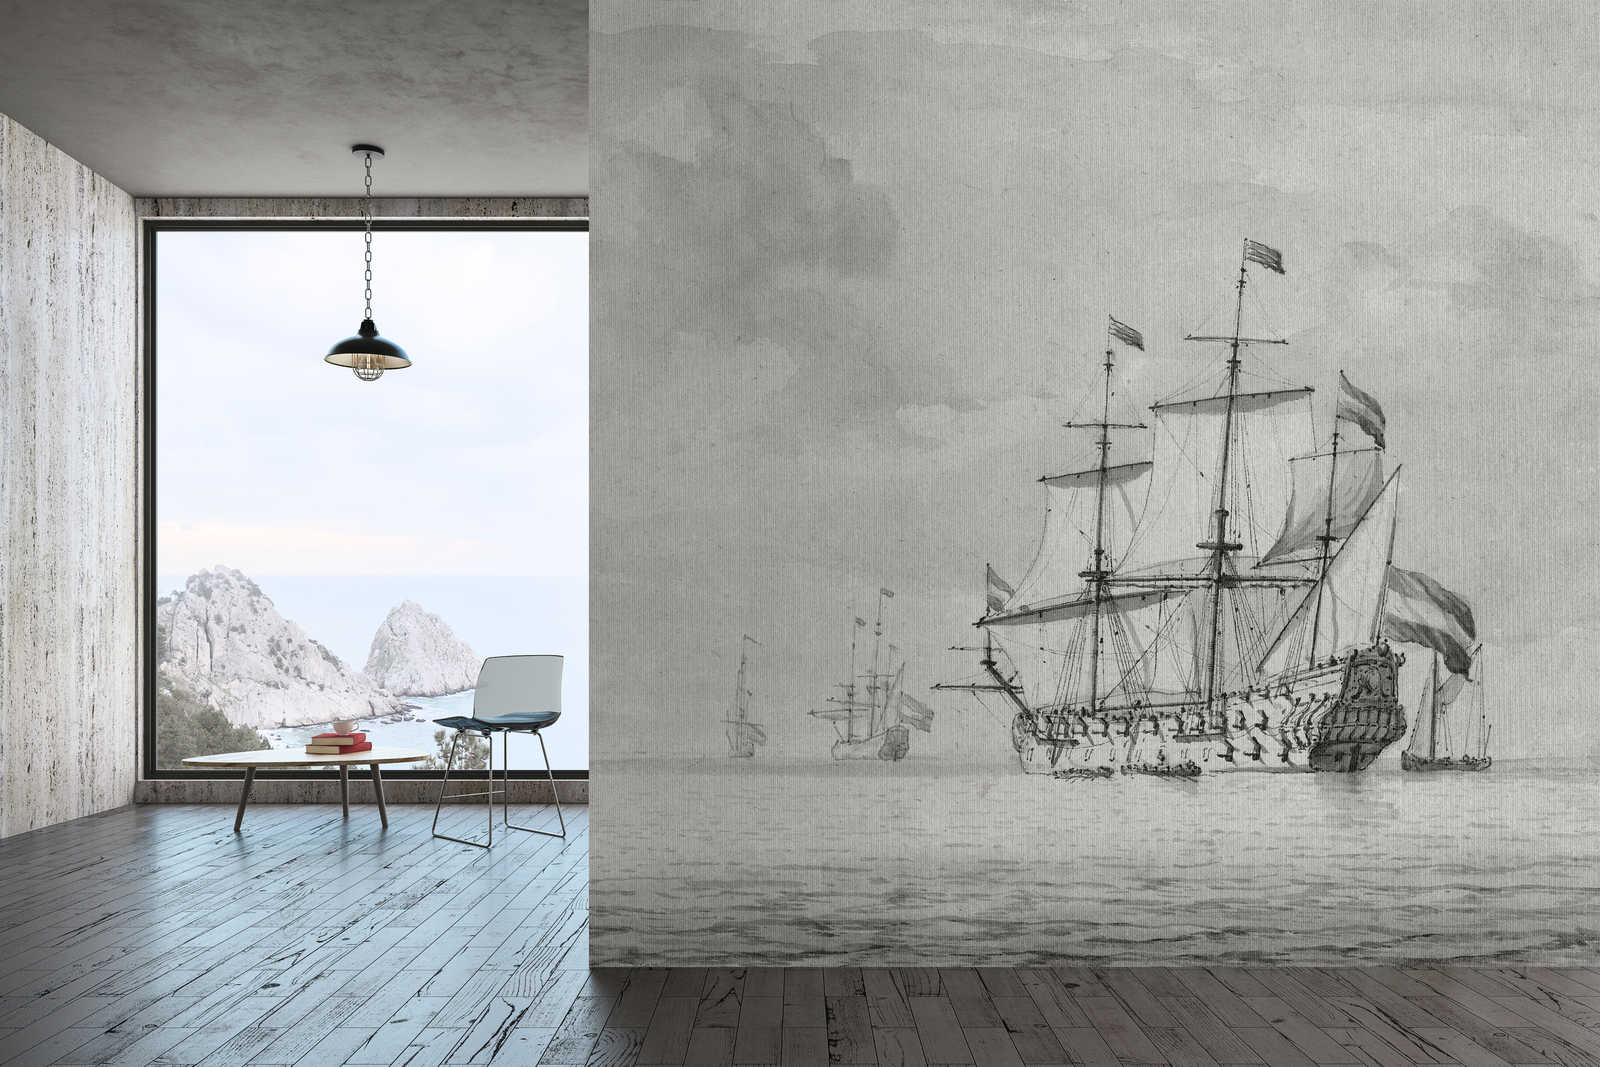             On the Sea 2 - grey beige photo wallpaper ships vintage painting style
        